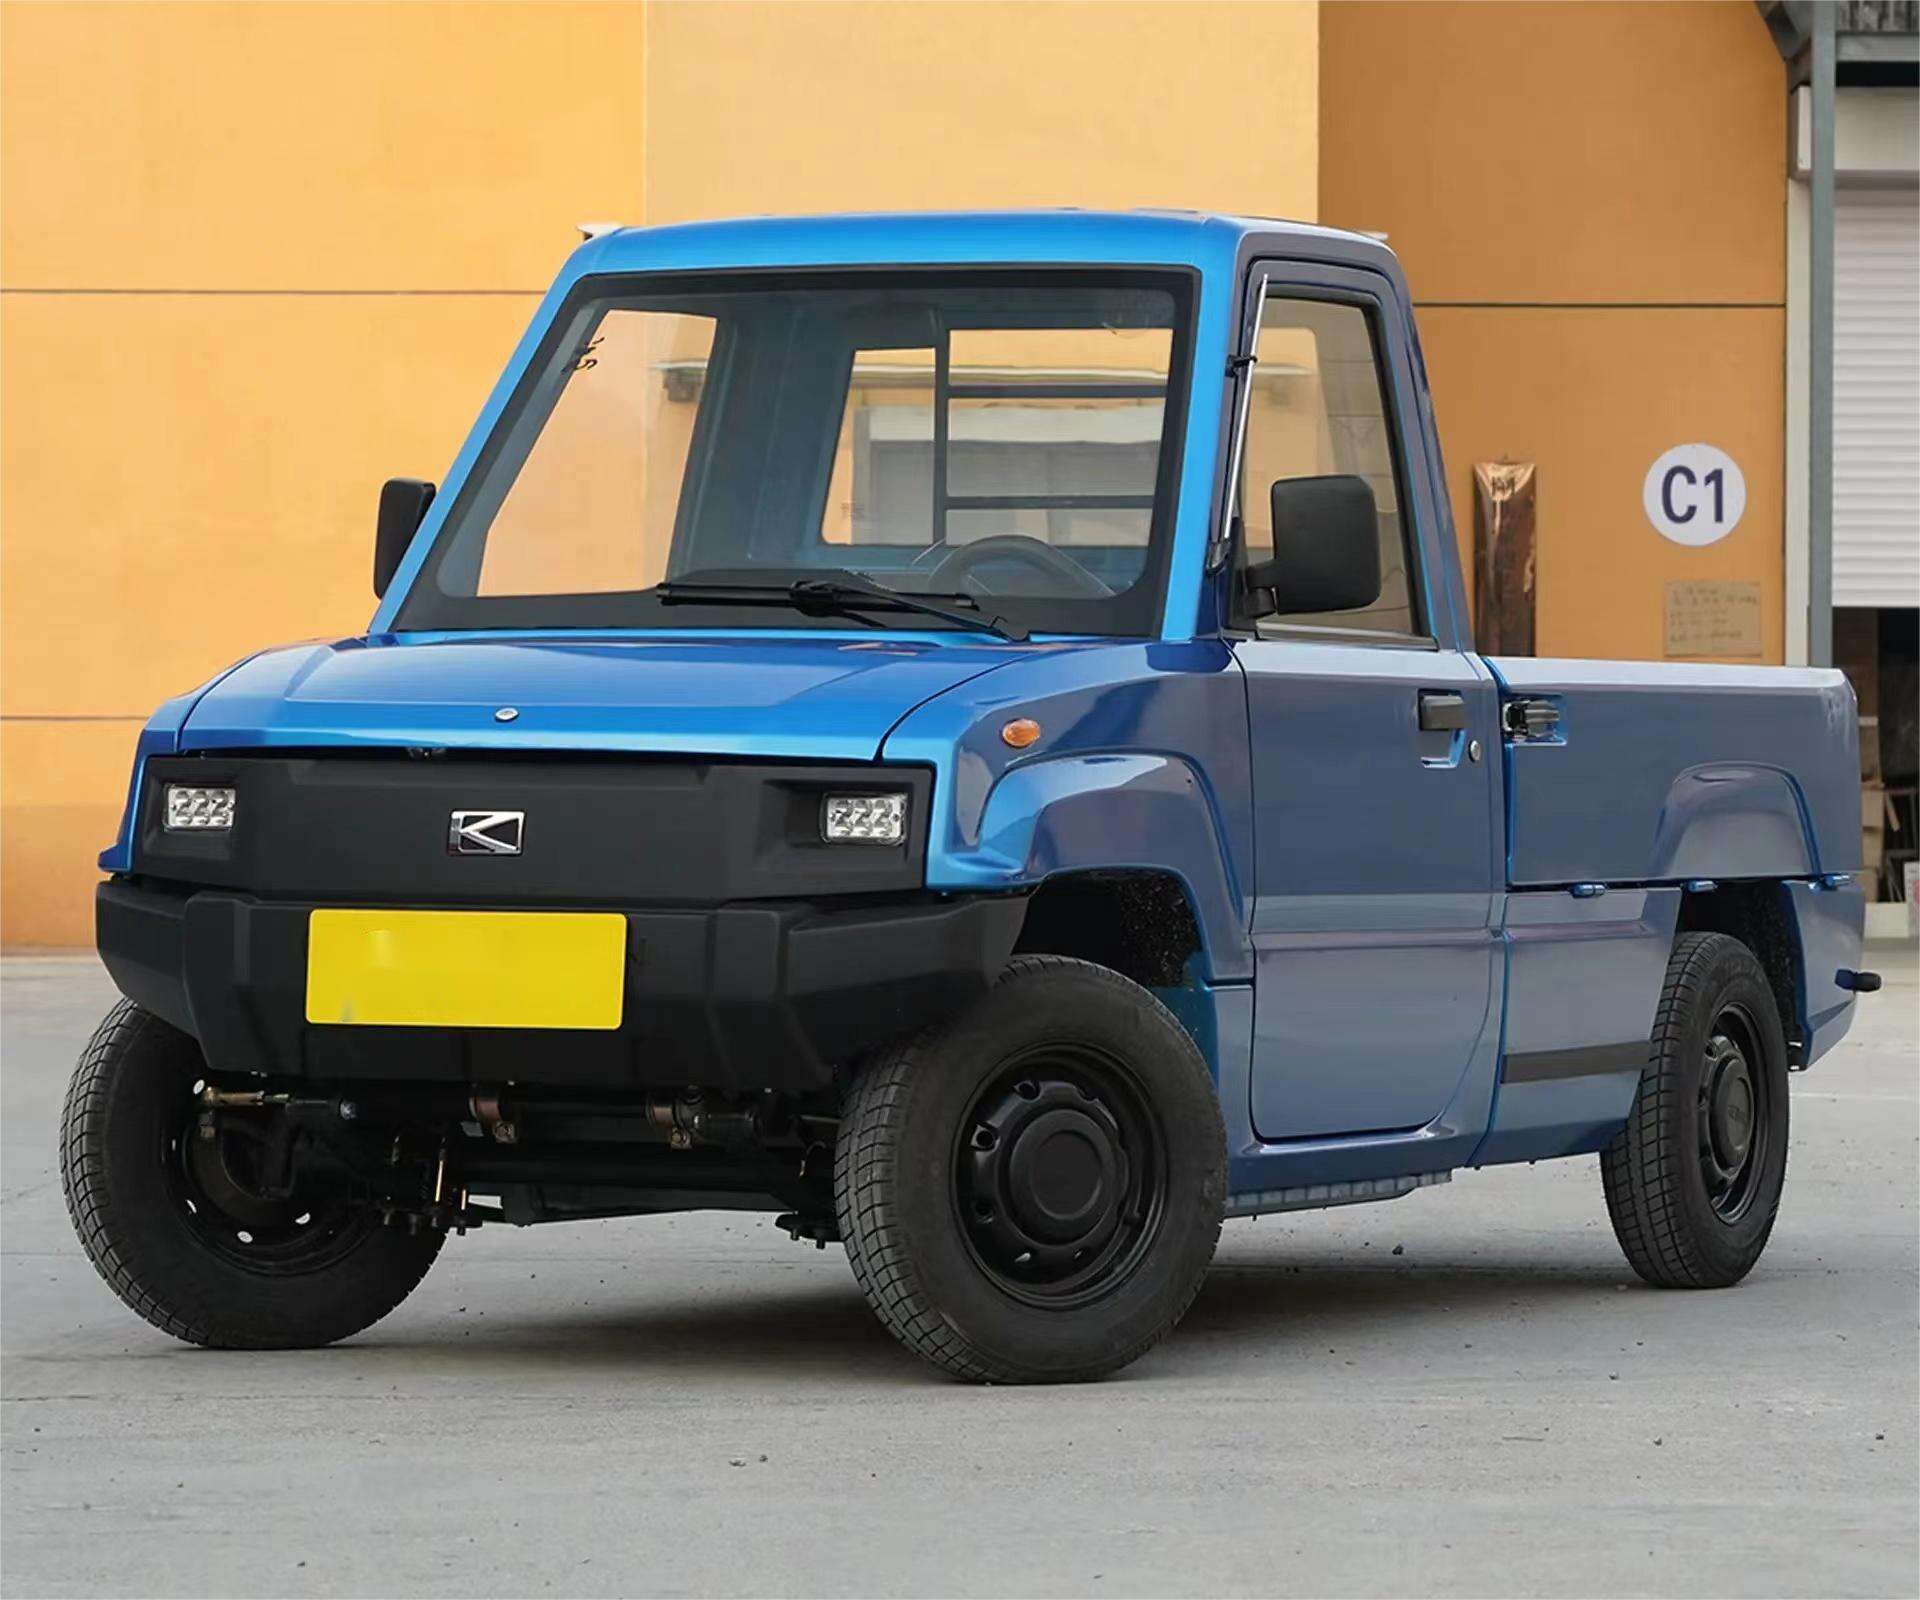 2023 Kaiyun 4x4 Pickup Truck XR Electric Pickup New Car High Power Off-road Truck Small Electric Energy Vehicle Low Price Export details